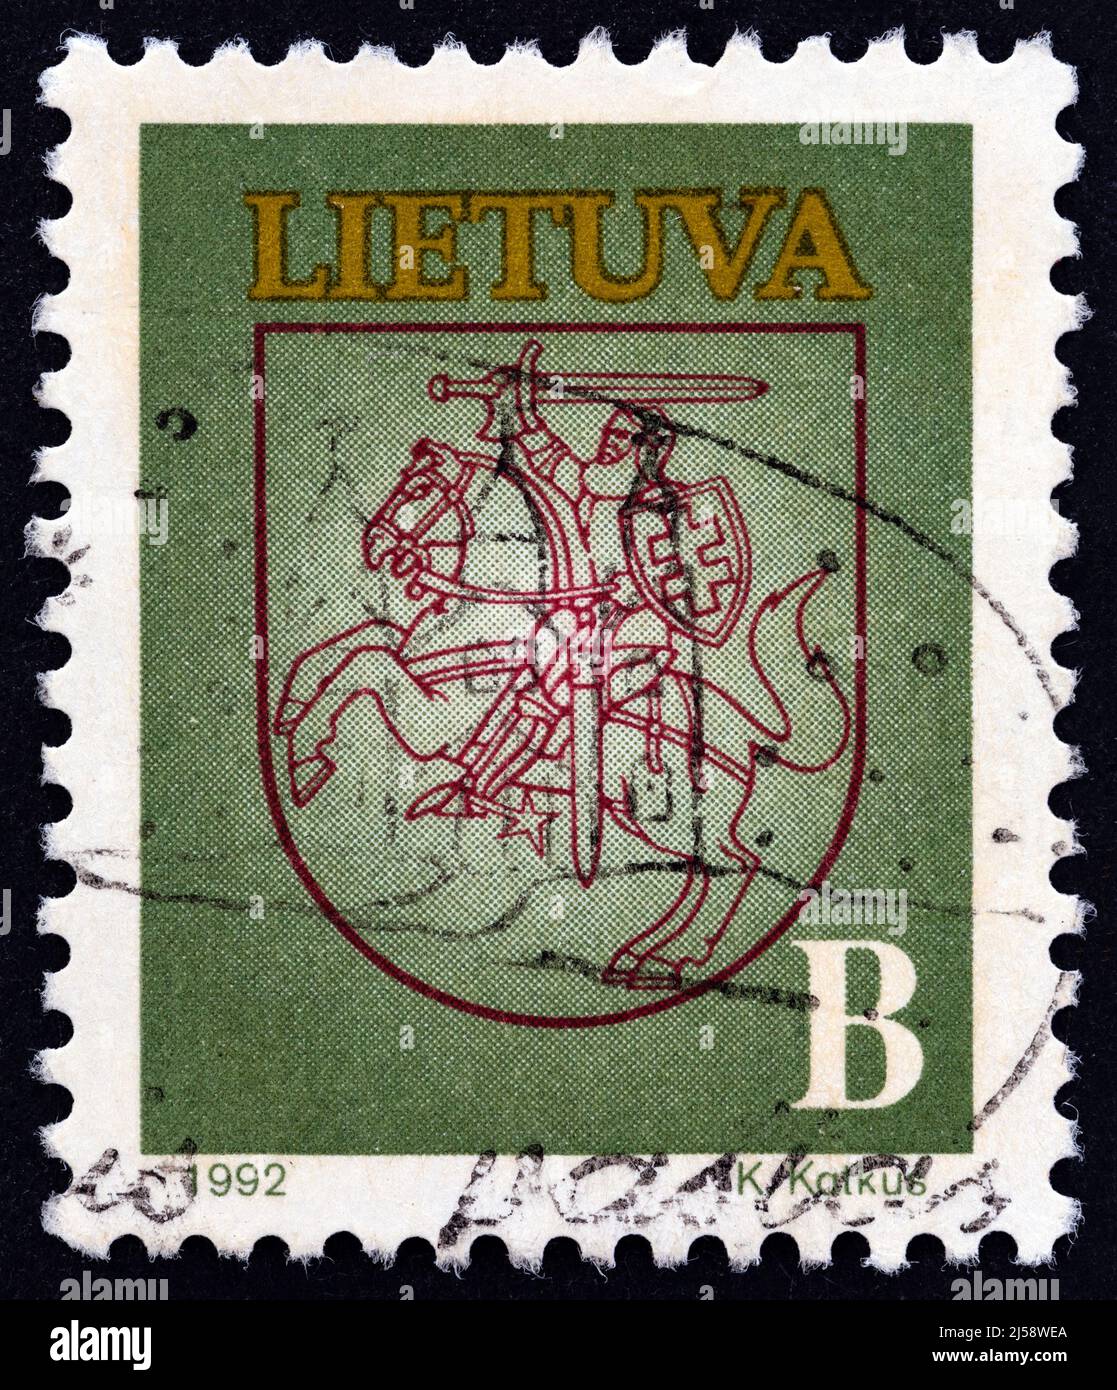 LITHUANIA - CIRCA 1993: A stamp printed in Lithuania shows state arms, circa 1993. Stock Photo